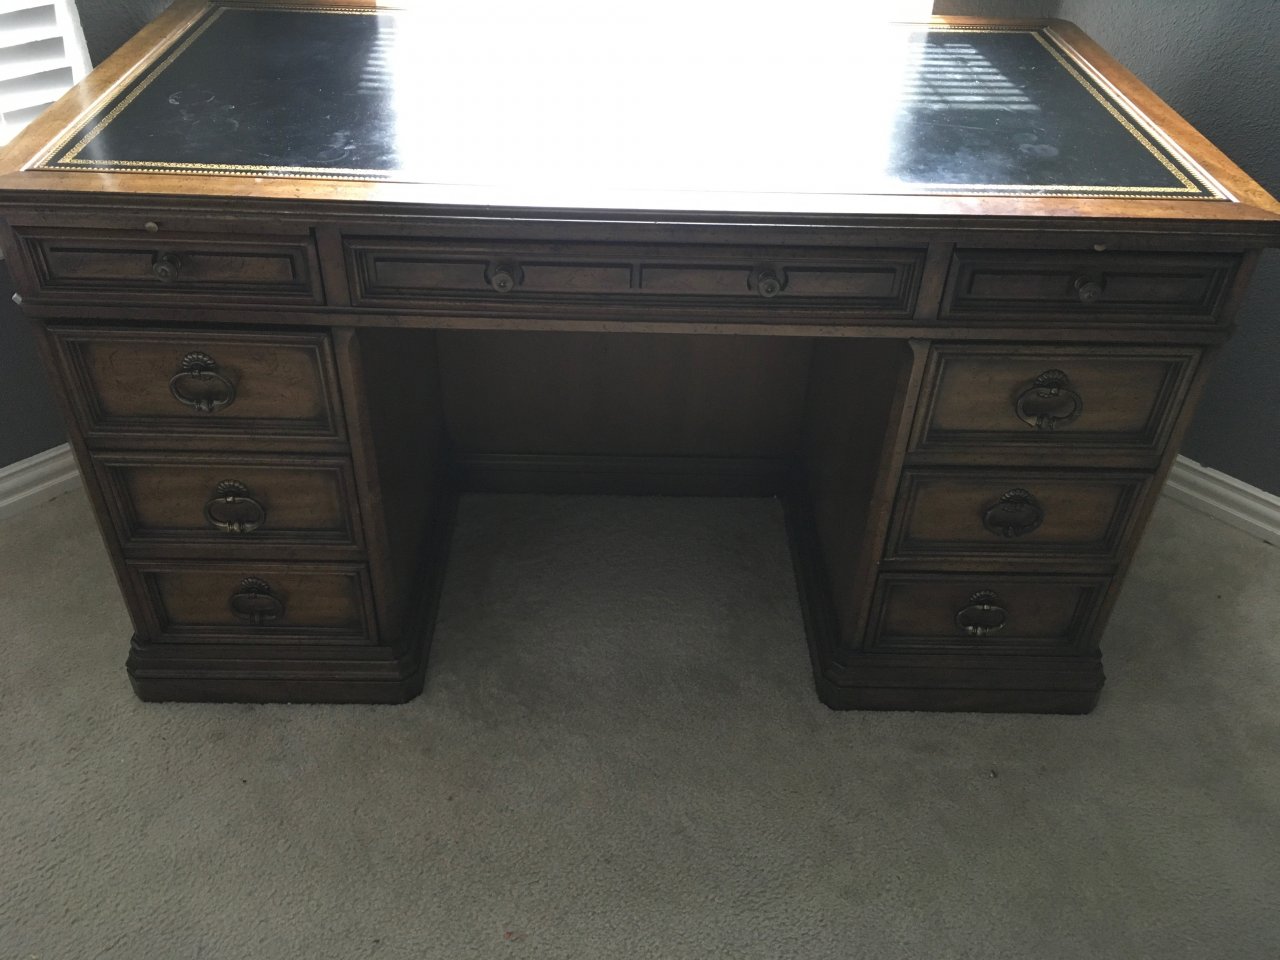 I Have A Sligh Executive Desk In Excellent Condition What Is The